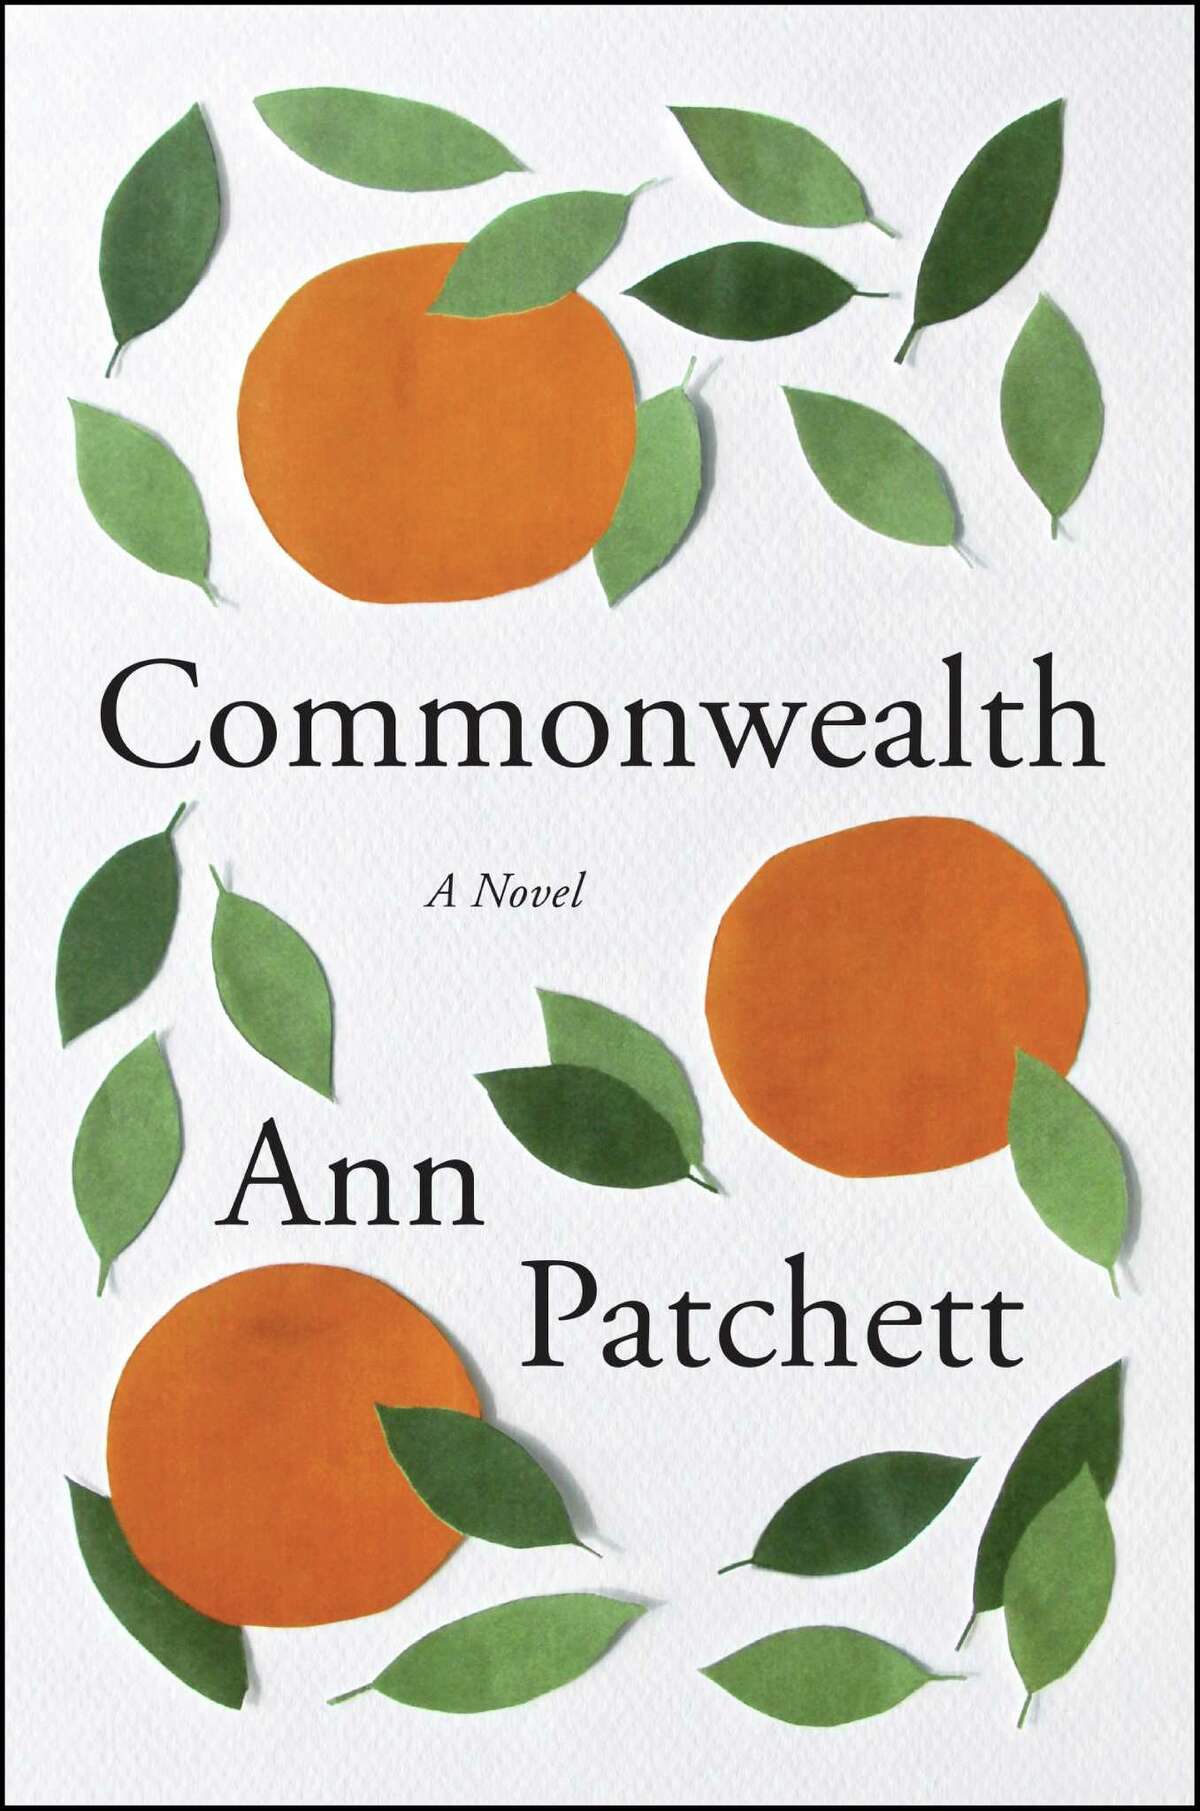 Patchett will read from "Commonwealth" at her Inprint appearance in Houston Oct. 17.